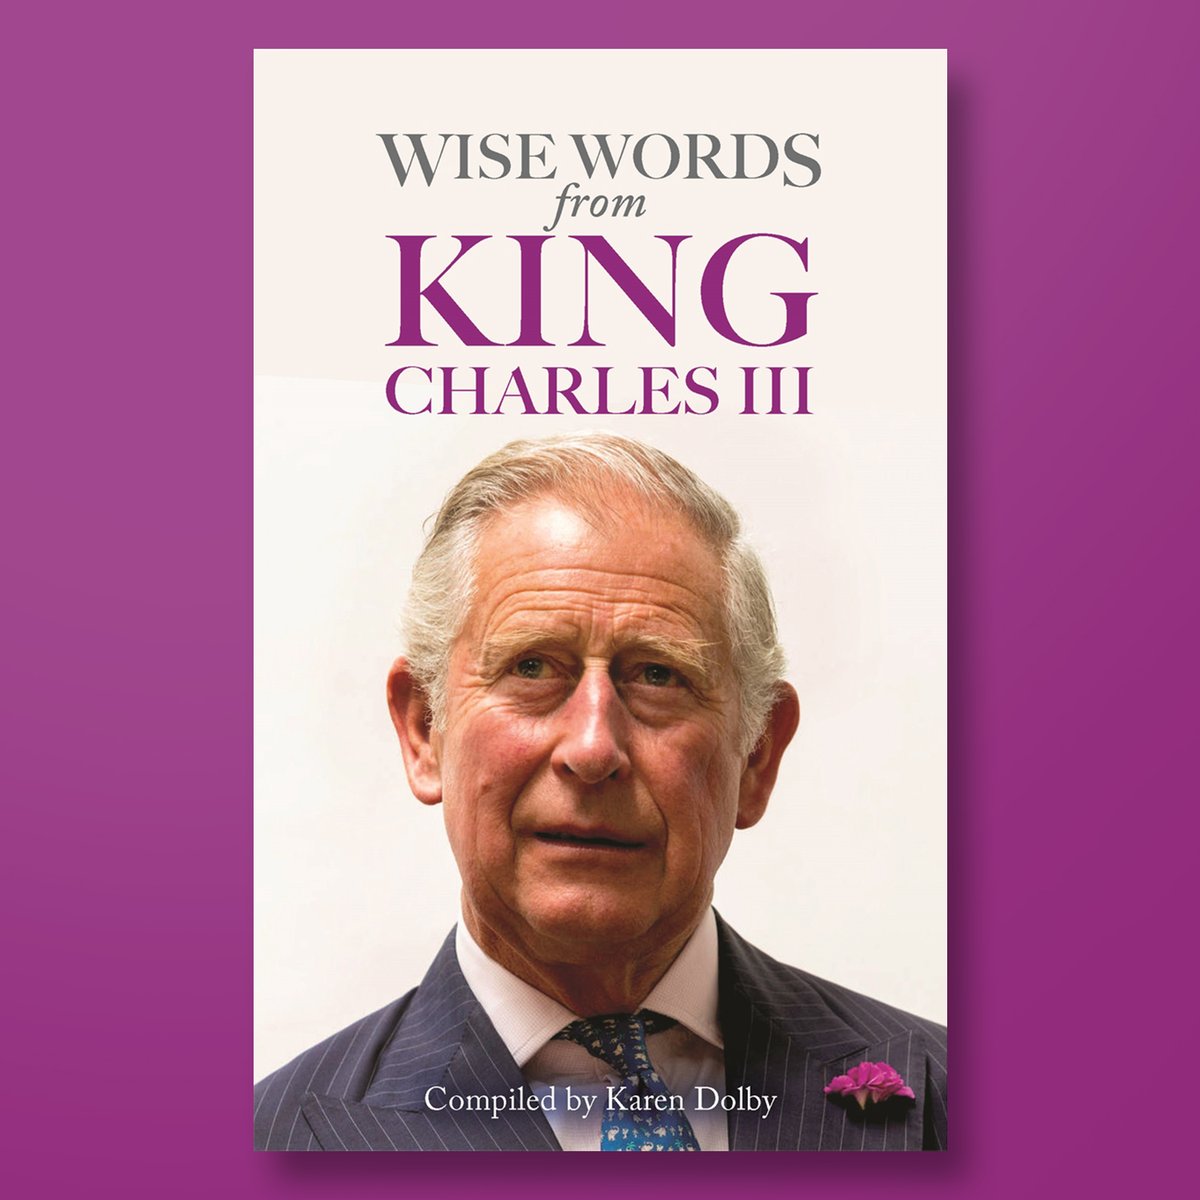 Charles Philip Arthur George, heir apparent for more than 70 years was crowned at Westminster Abbey in a historic ceremony full of ritual and pageantry. #WiseWordsFromKingCharlesIII explores the personality behind the pomp, coming 25th April 👑 ow.ly/c0M350R33Yk